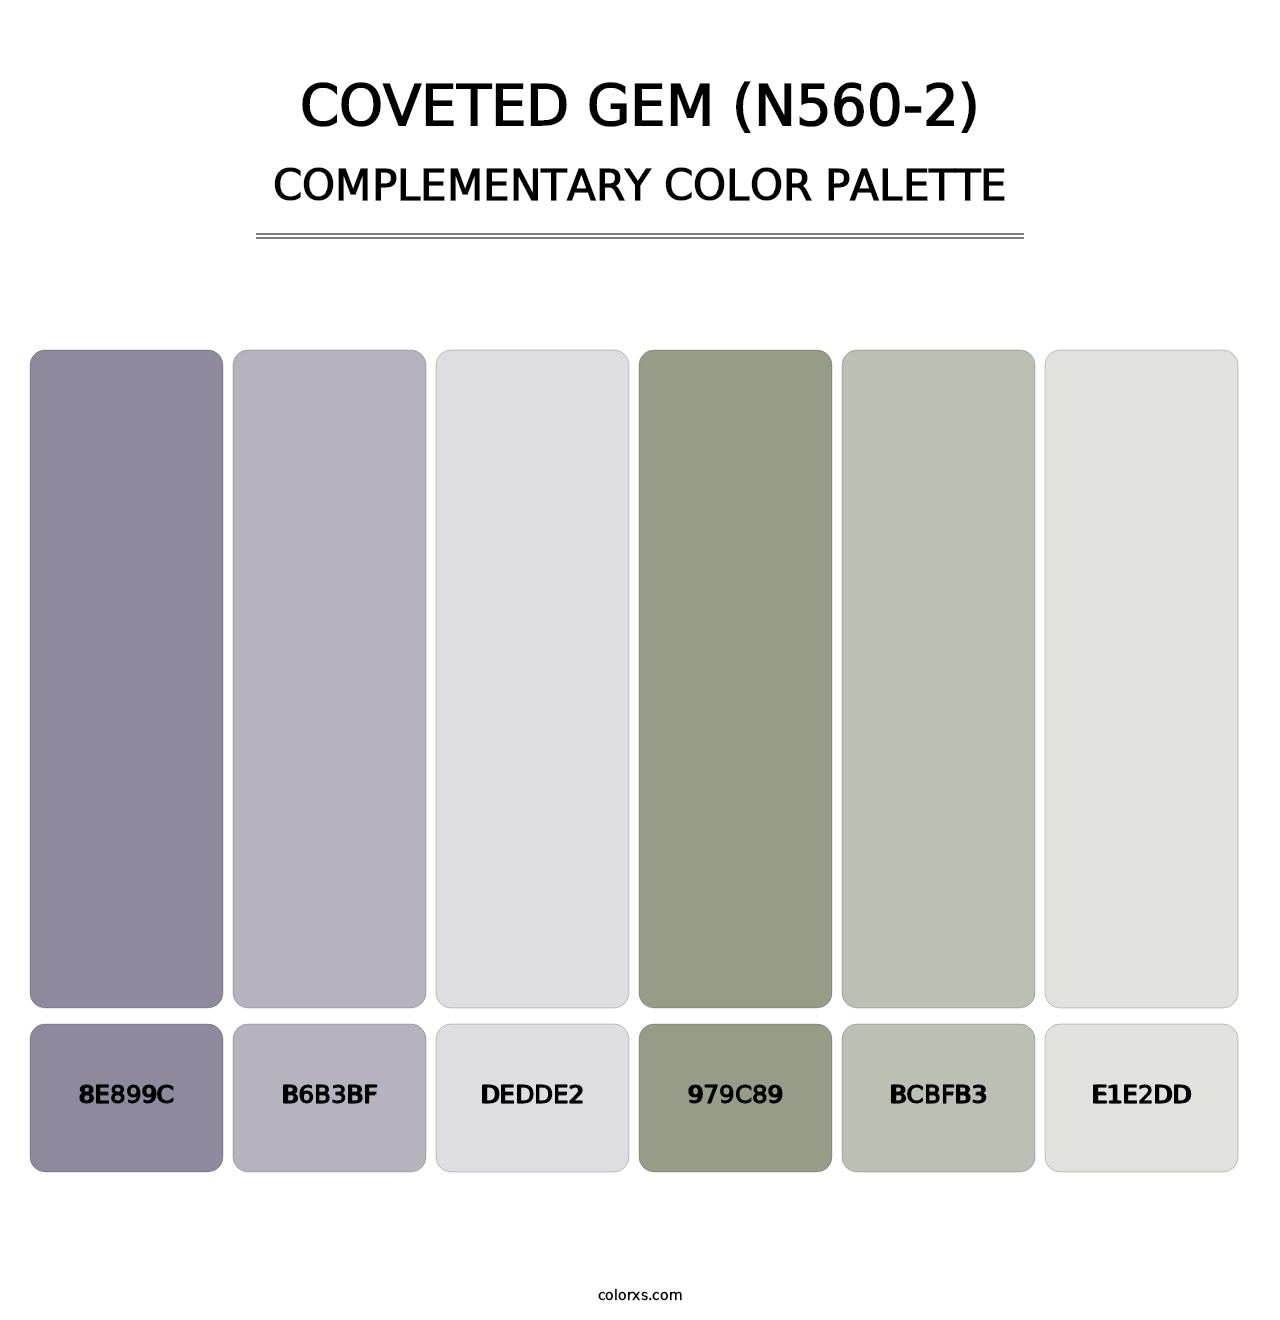 Coveted Gem (N560-2) - Complementary Color Palette